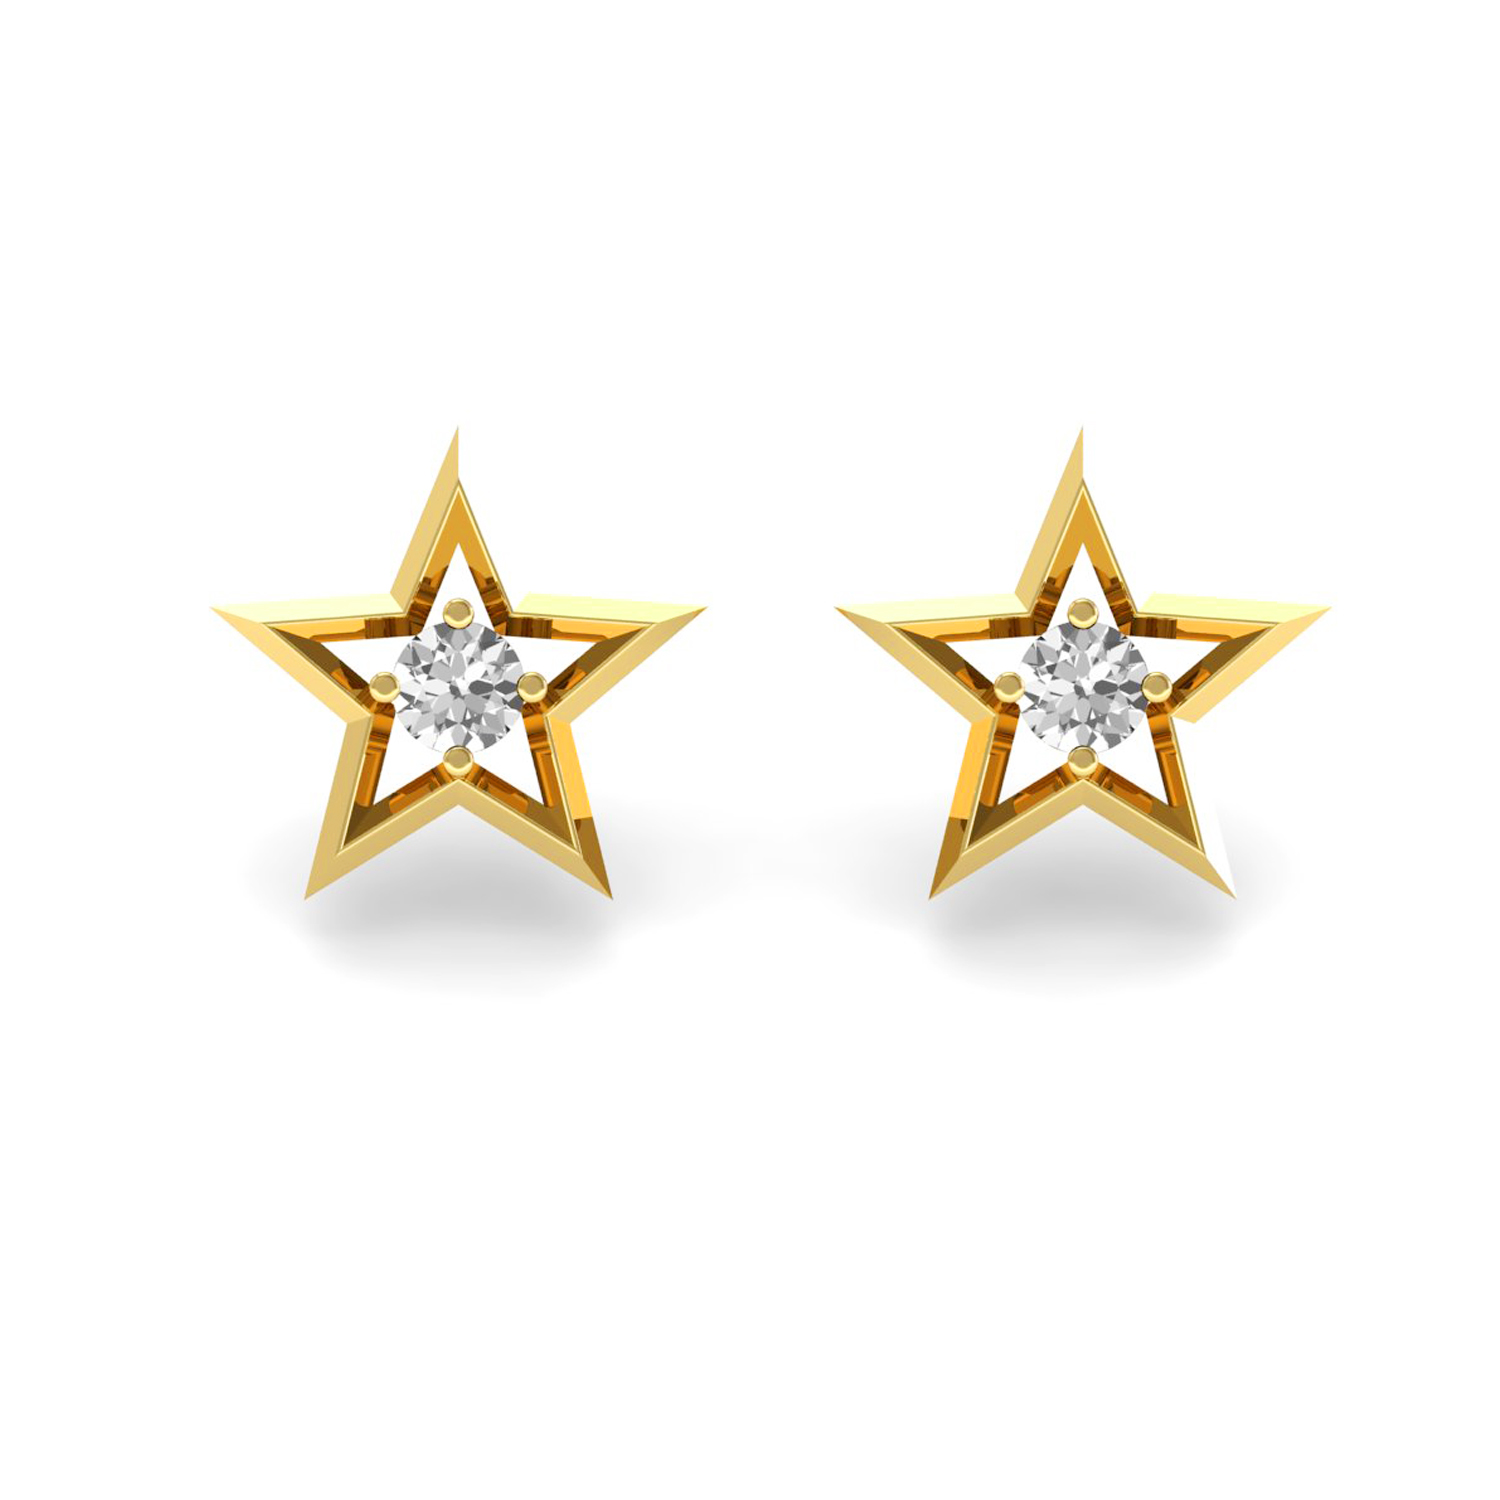 Star Shape Solitaire Diamond Stud Earrings Solid Gold Jewelry